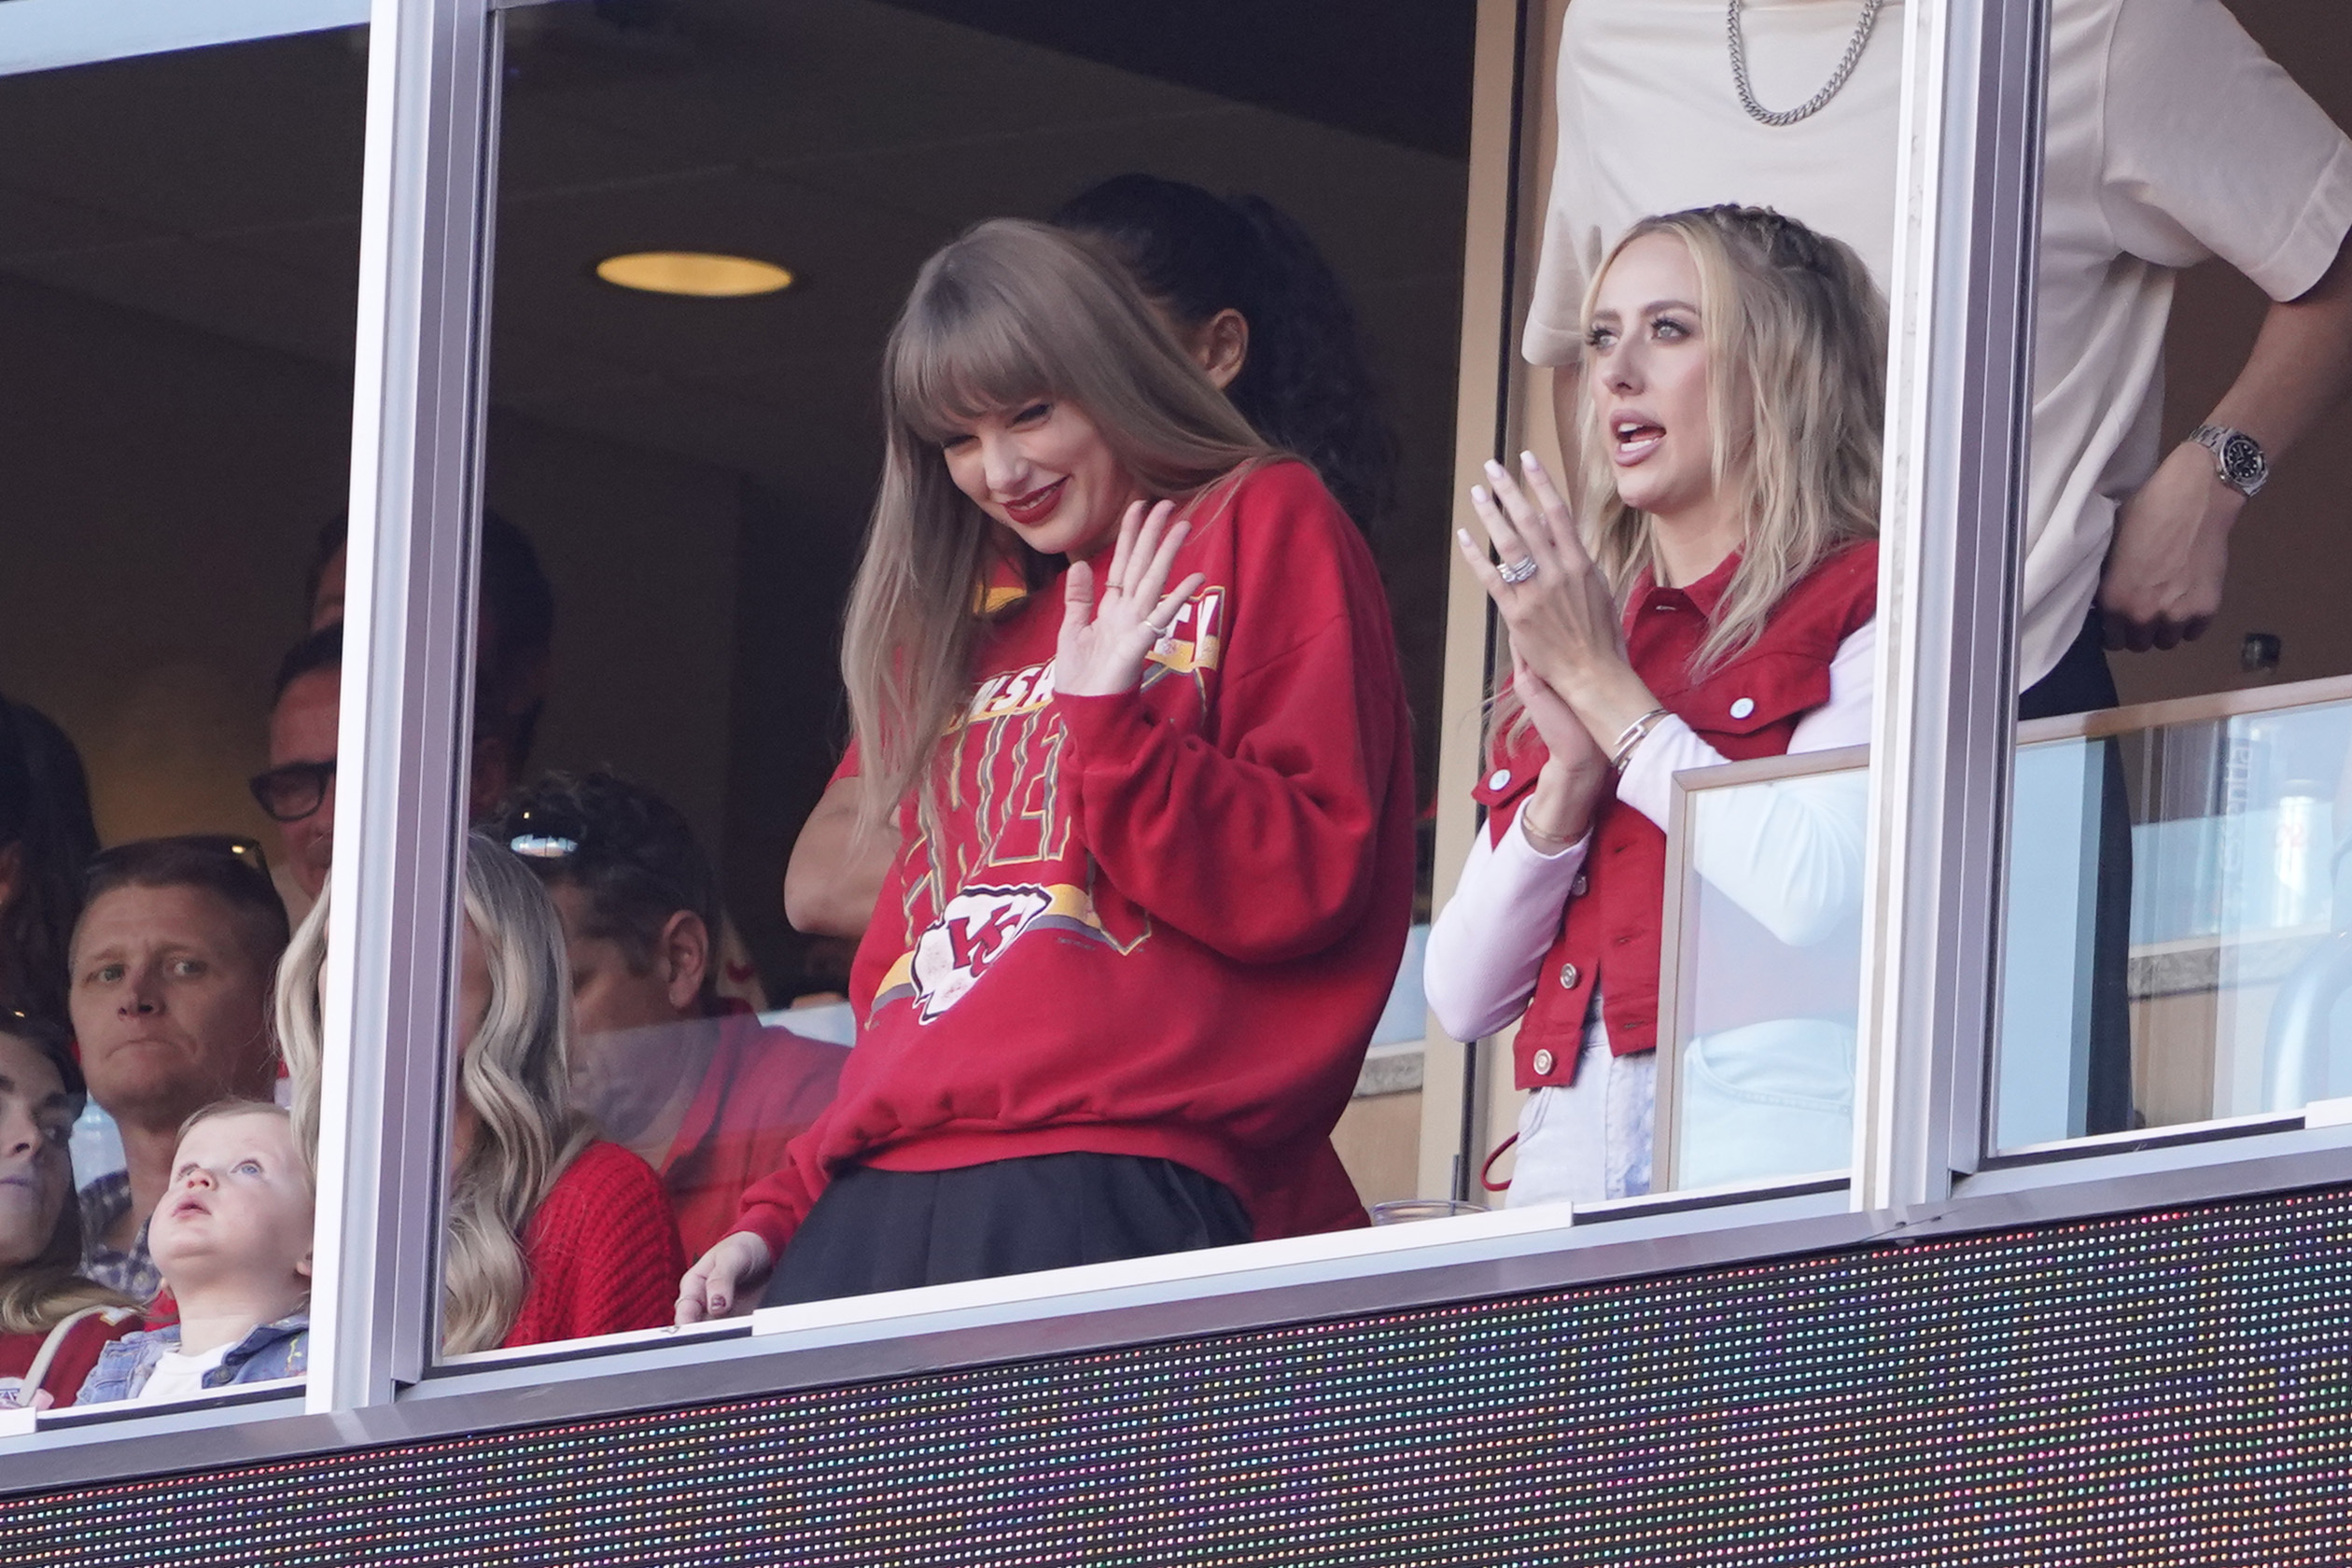 Taylor has attended many Chiefs games throughout the football season